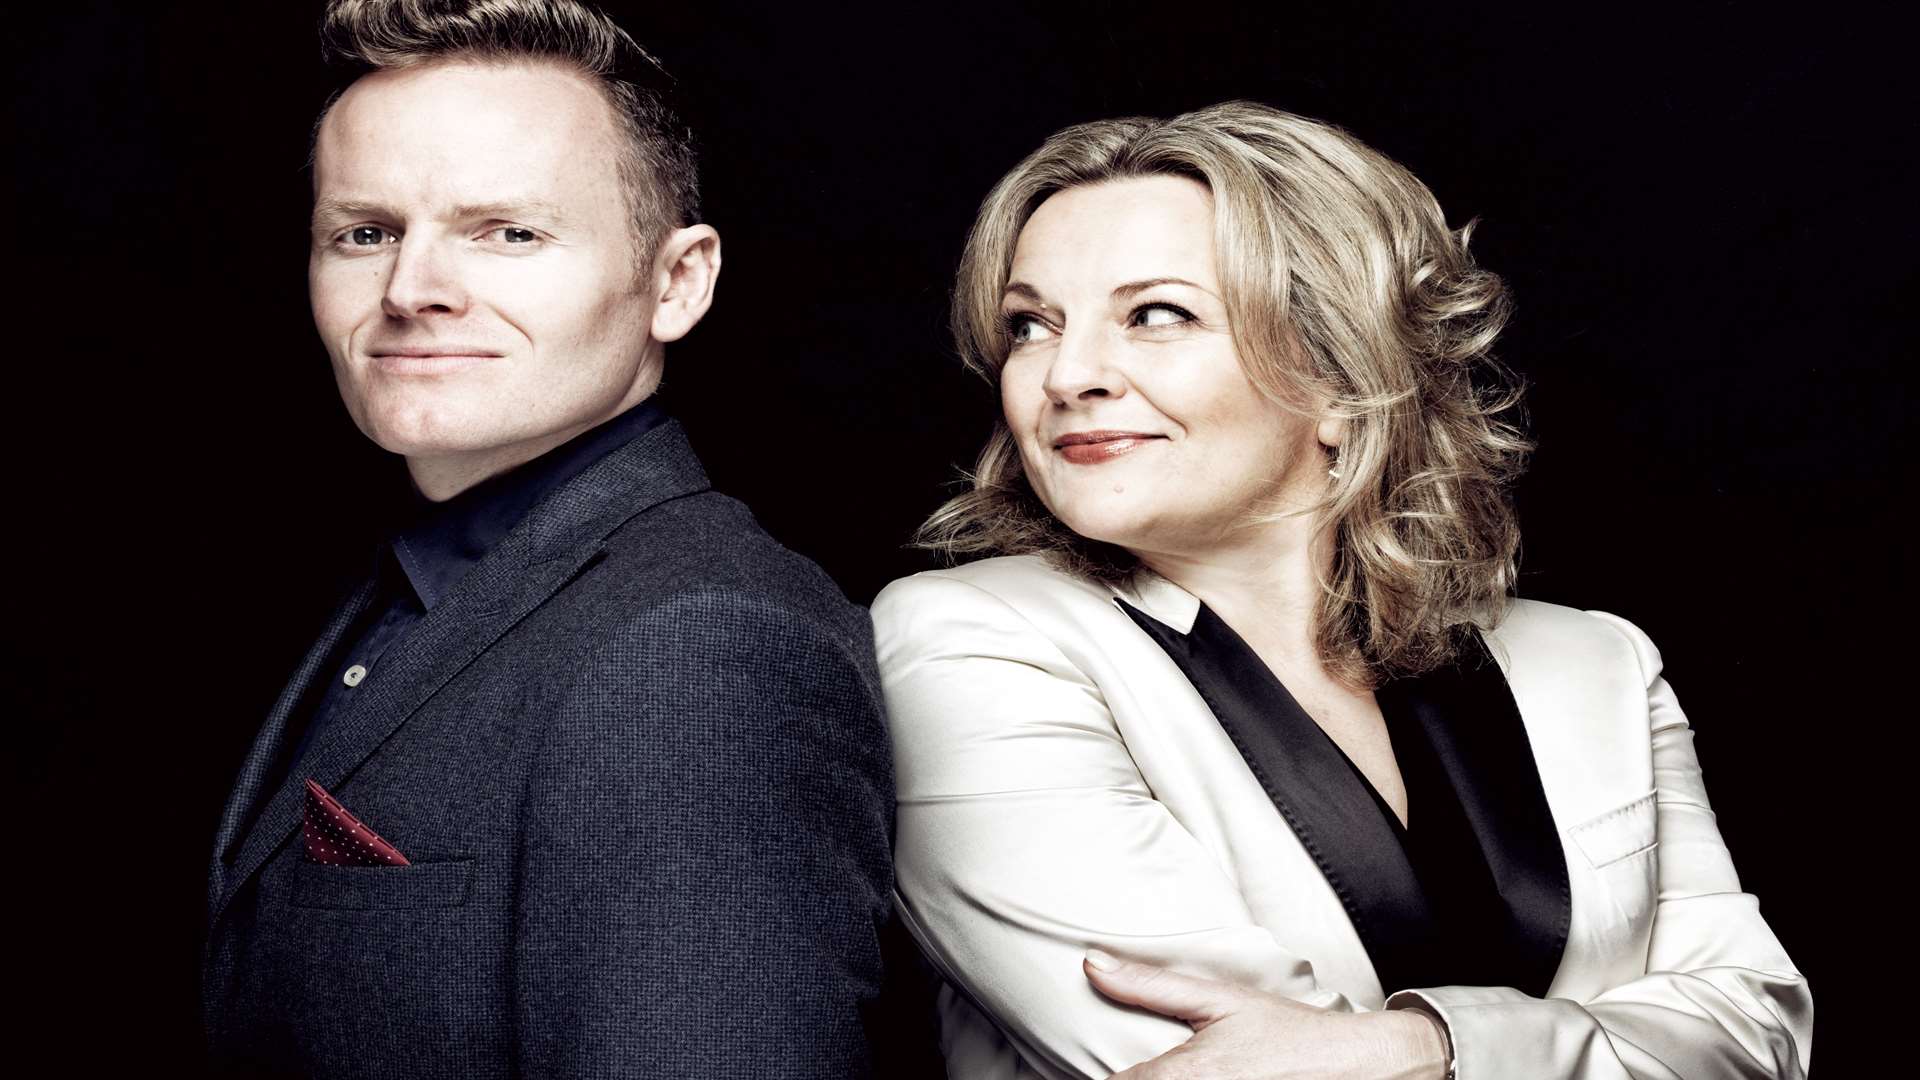 The Two Of Us by Claire Martin and Joe Stilgoe at the Canterbury Festival